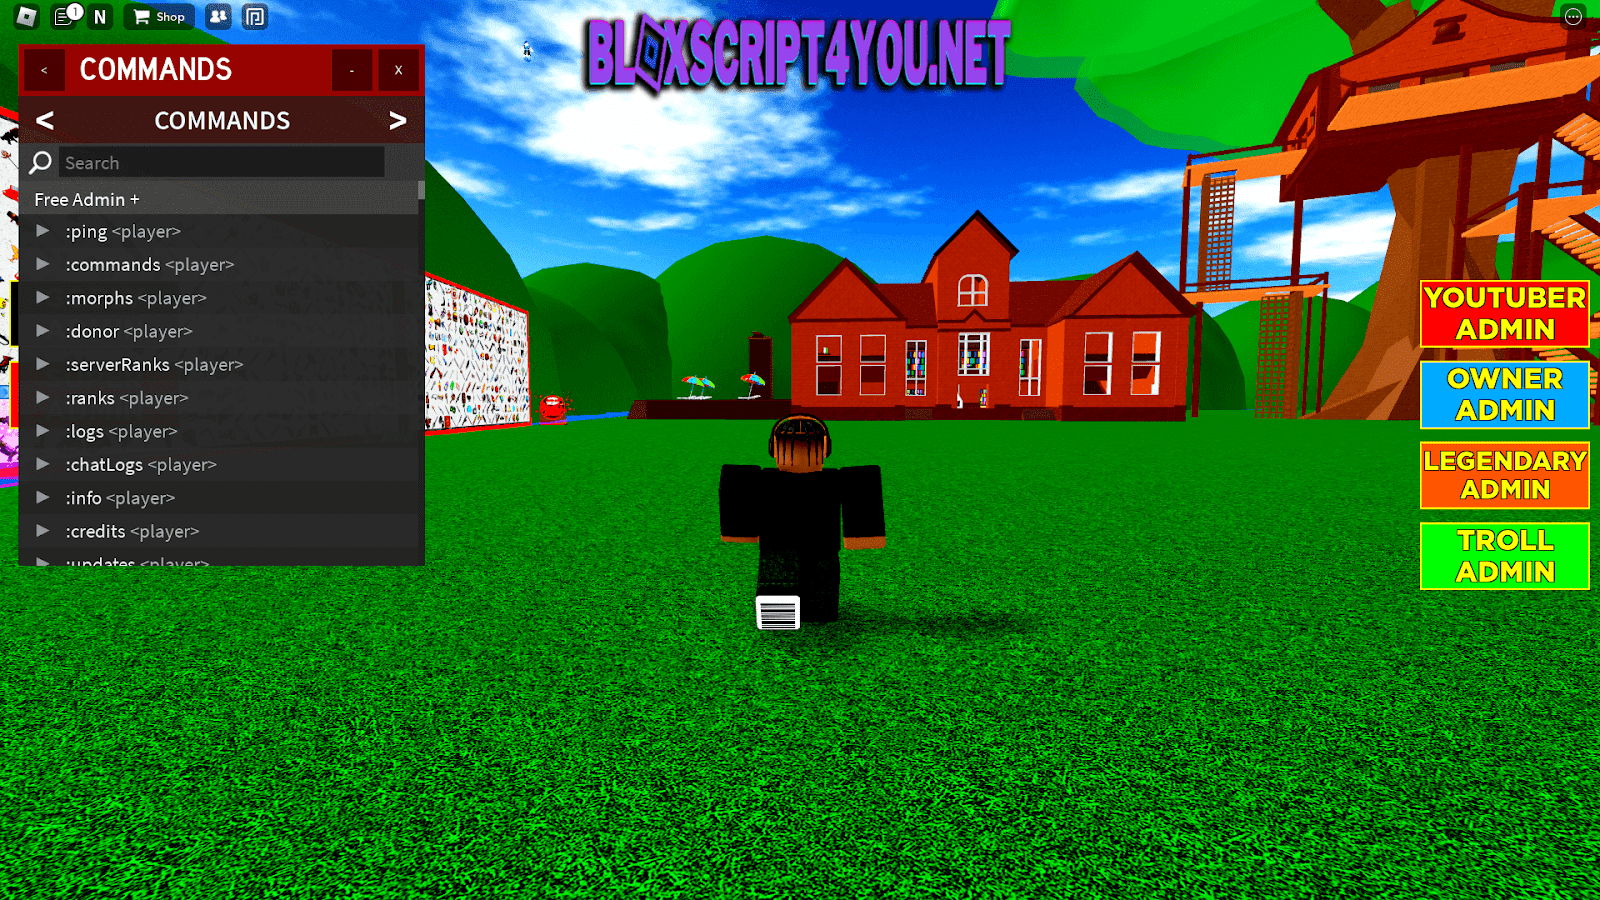 Wait, This Soul Eater Roblox Game is FREAKING AWESOME! (Soul Eater:  Resonance) 